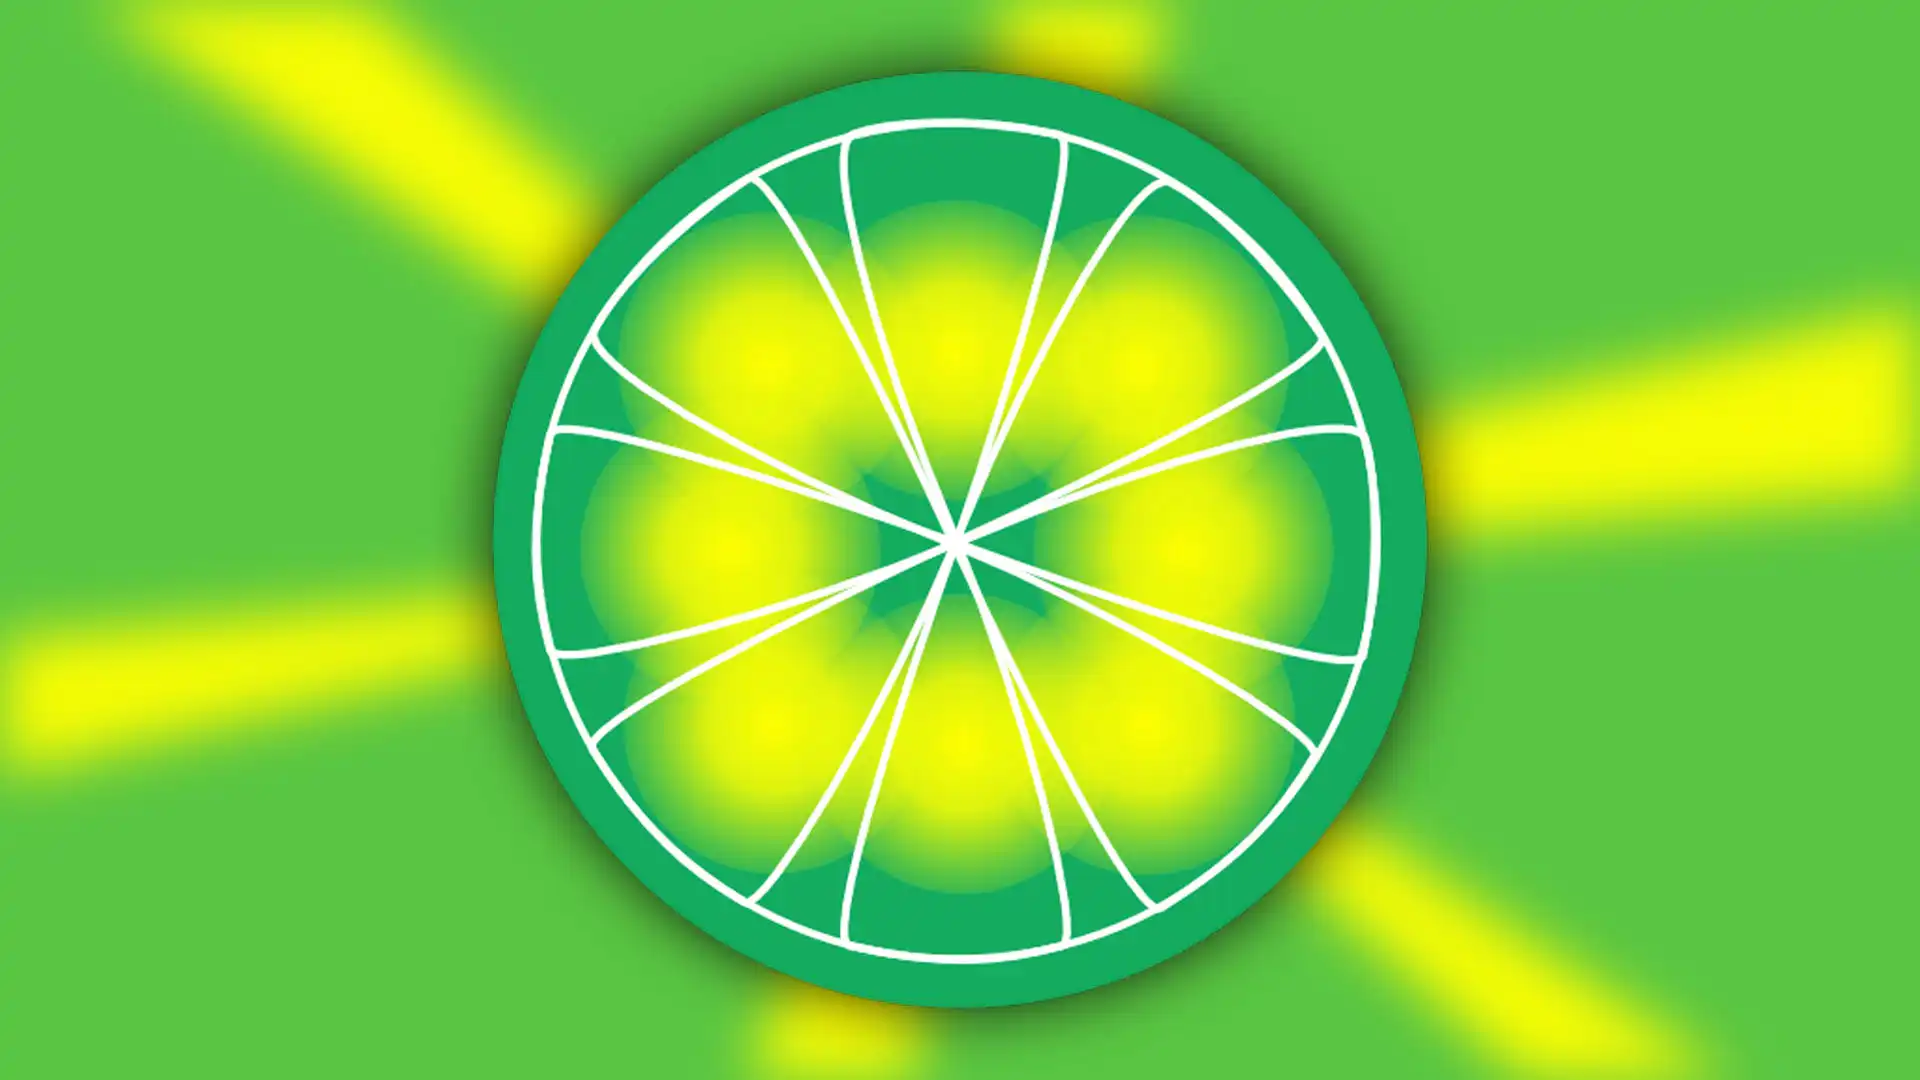 LimeWire is being revived as an NFT marketplace